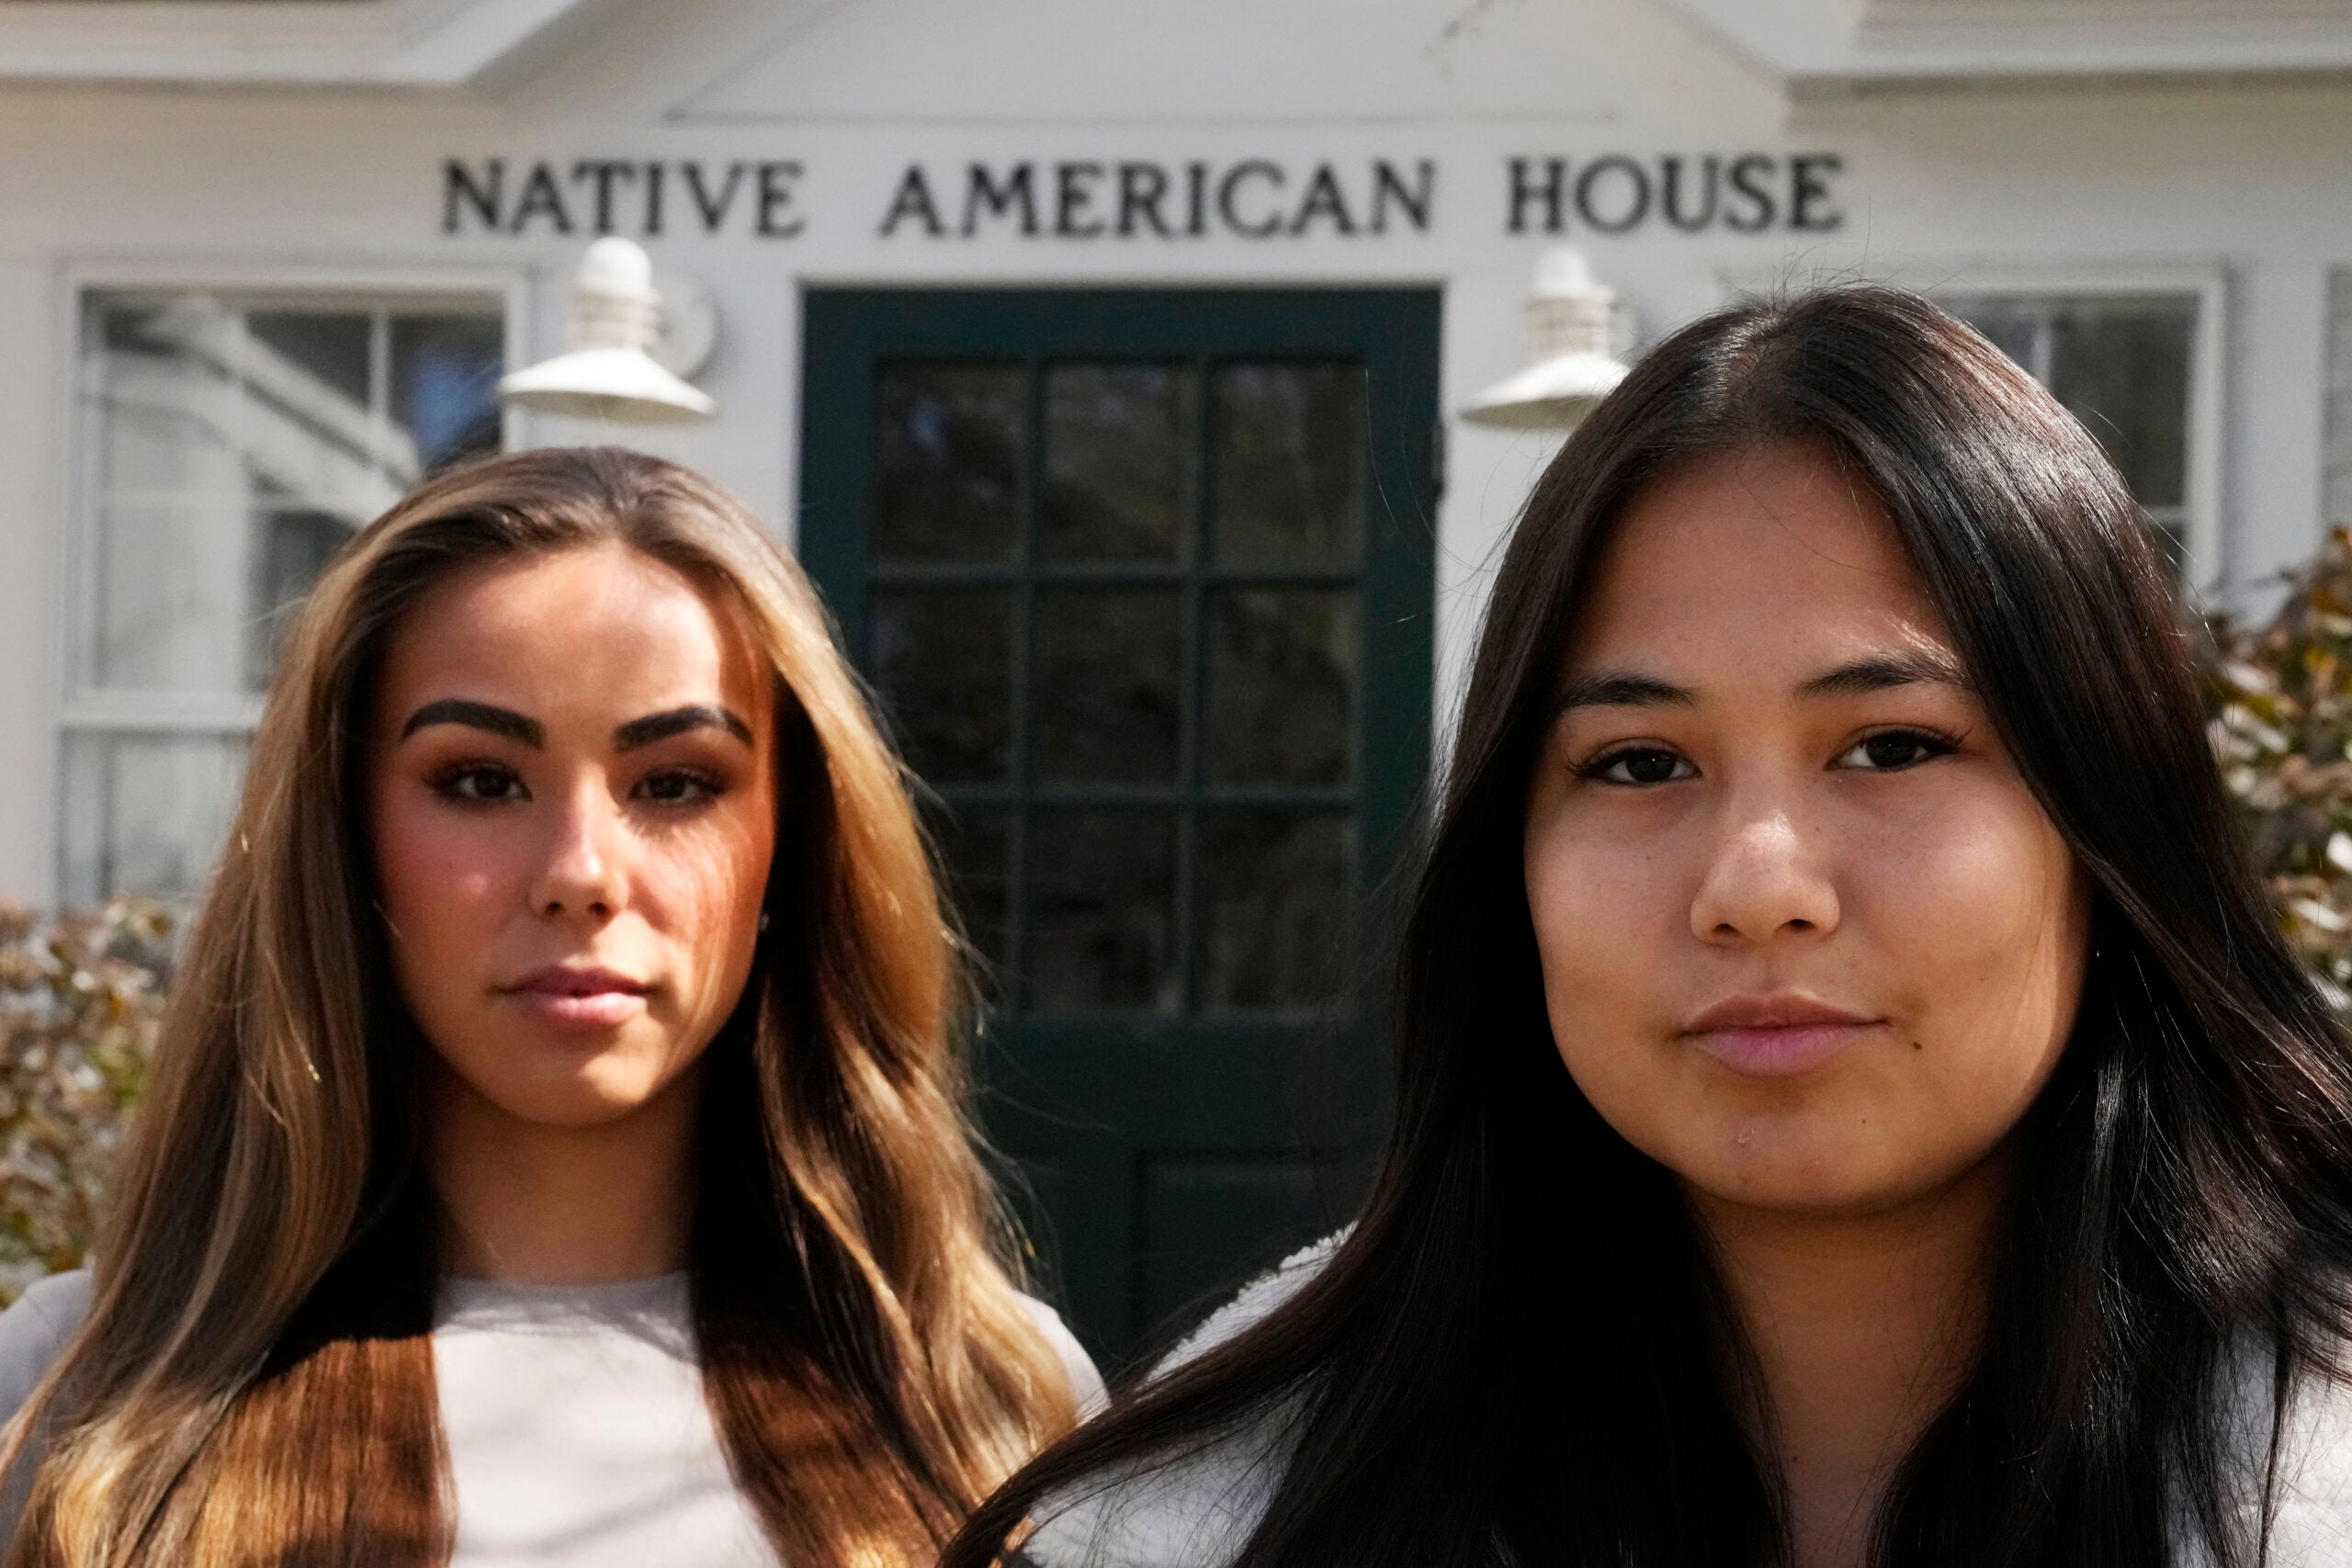 Dartmouth College students Marisa Joseph, right, a member of the Tulalip Tribes of Washington, poses with Ahnili Johnson-Jennings, left, a member of the Quapaw, Choctaw, Sac and Fox and Miami tribes, pose outside the Native American House at Dartmouth College, Friday, April 7, 2023, in Hanover, N.H.